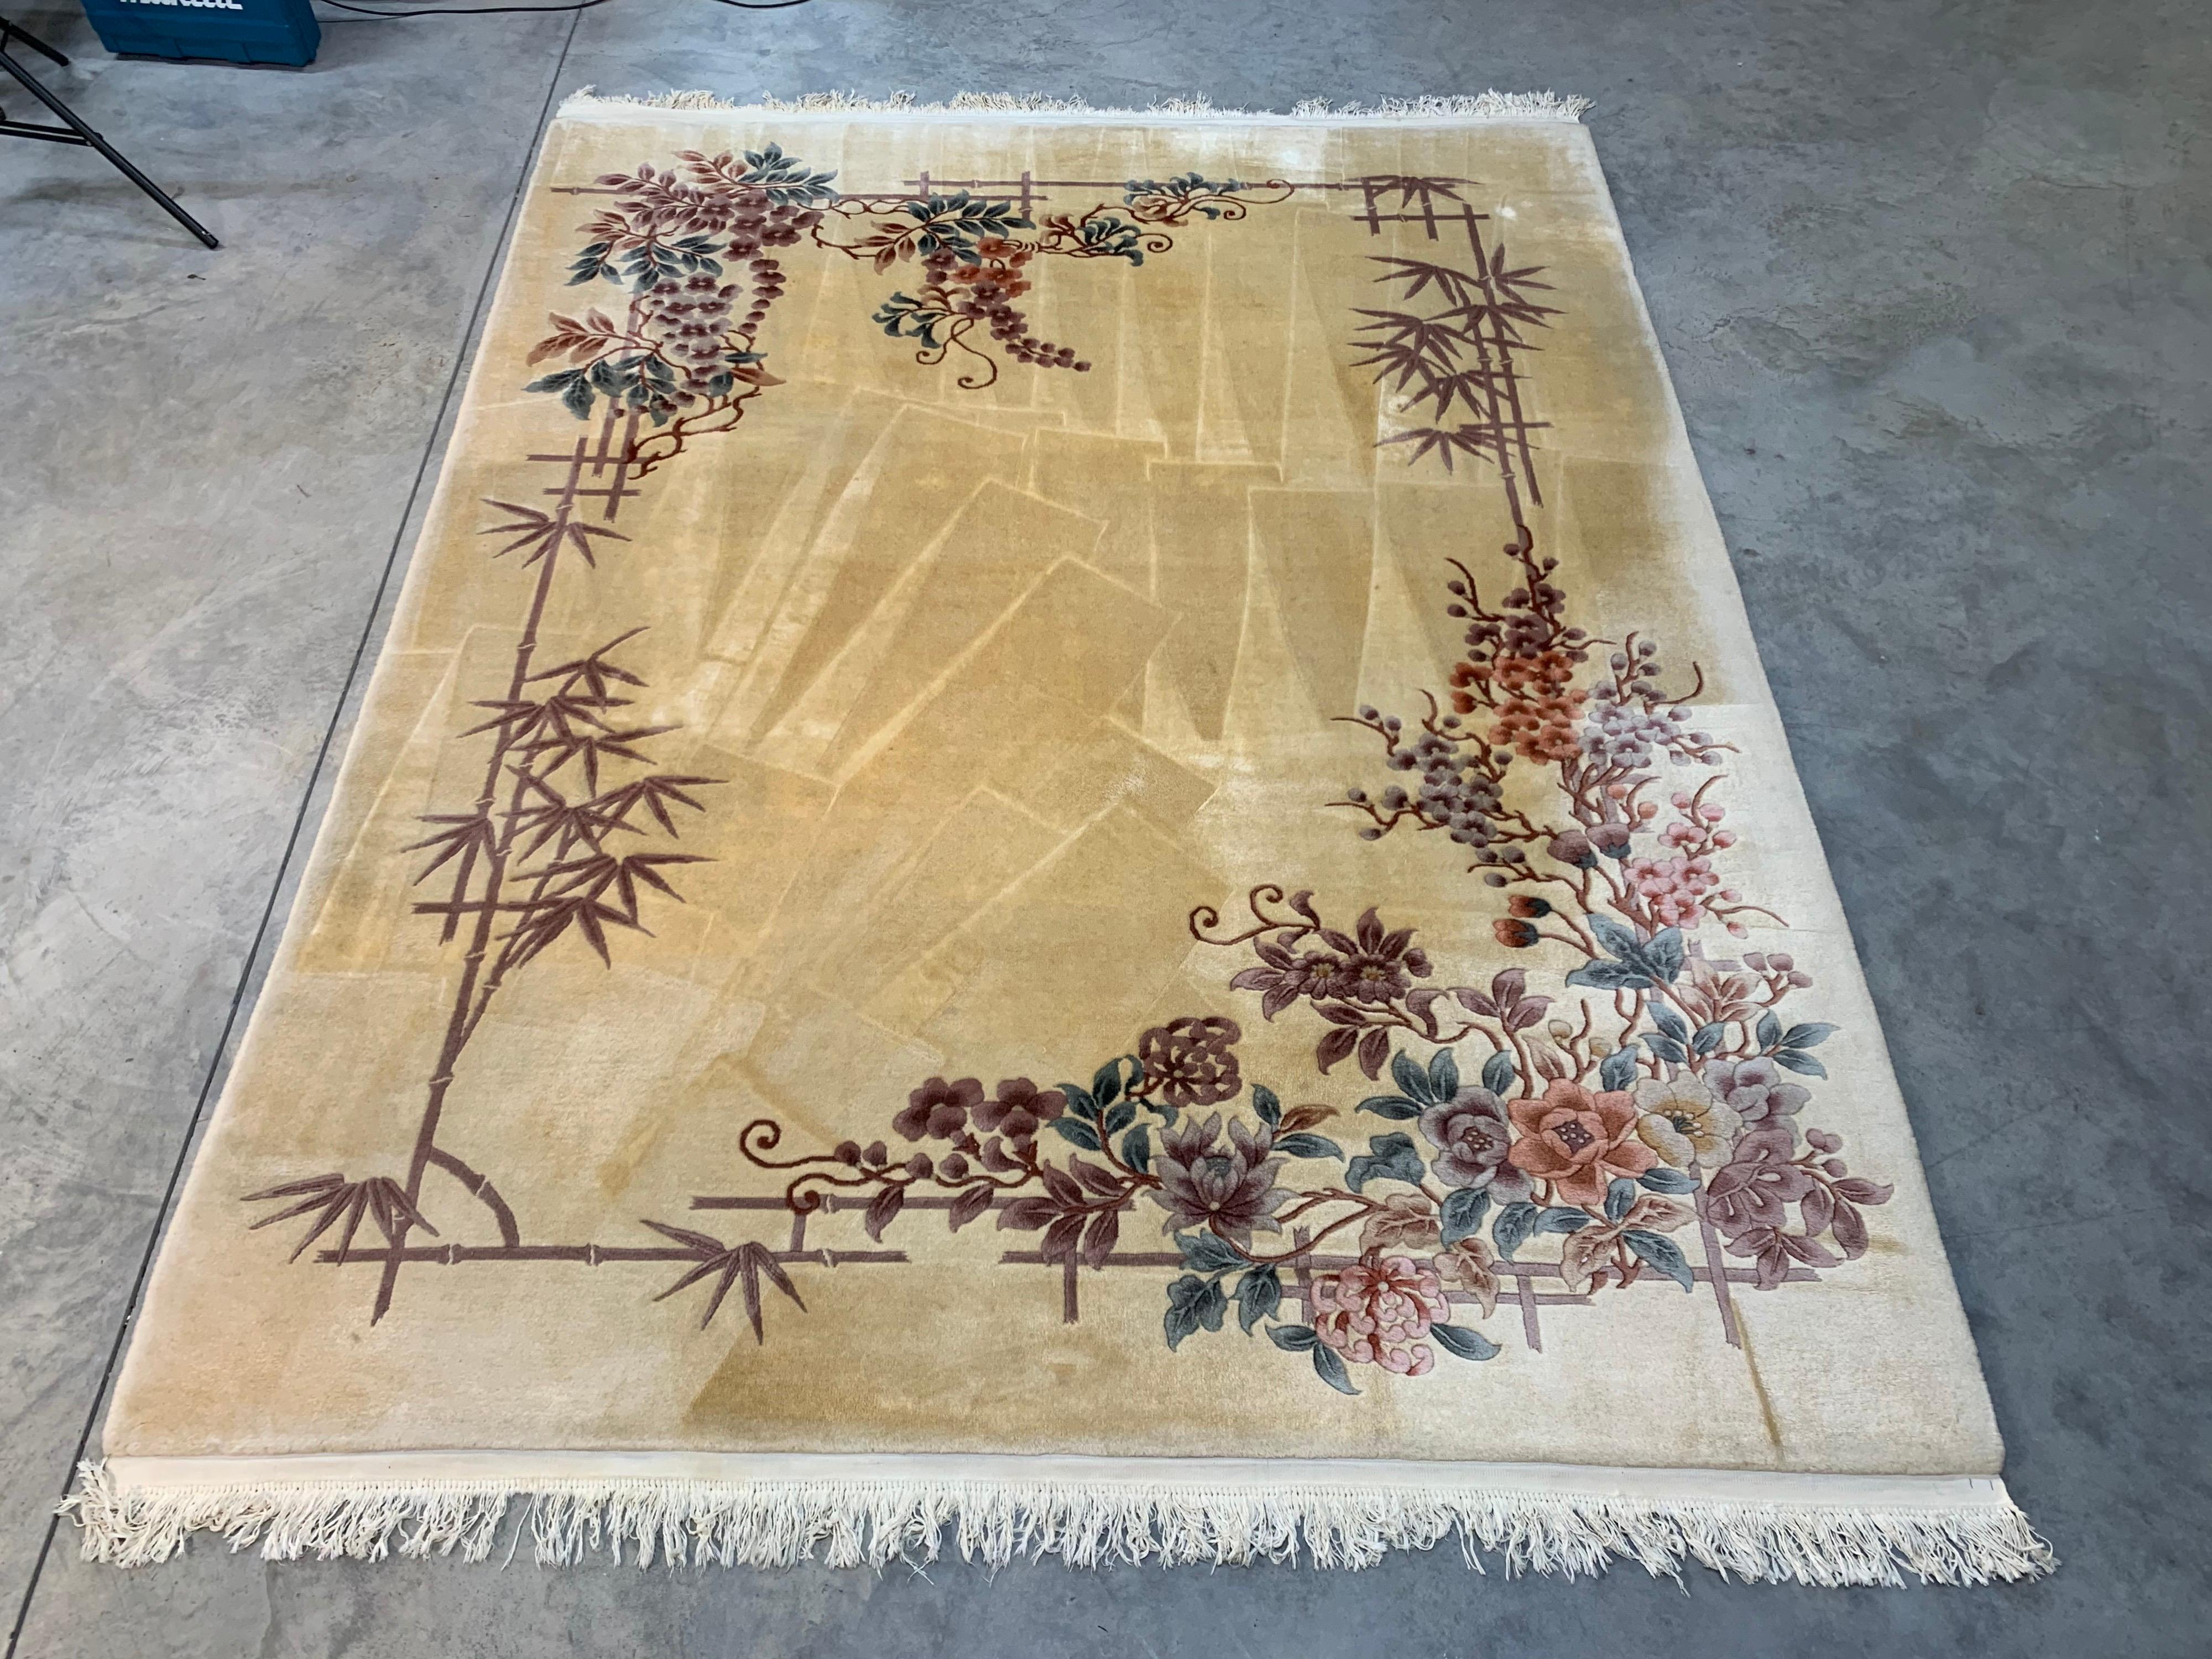 A beautiful 8 x 10’ Art Deco Revival Oriental throw rug having vegetable dyed bamboo and floral patterns. Hand woven and professionally cleaned. Striations seen in the image are from the cleaner and streak to the lighter color tones when you wipe